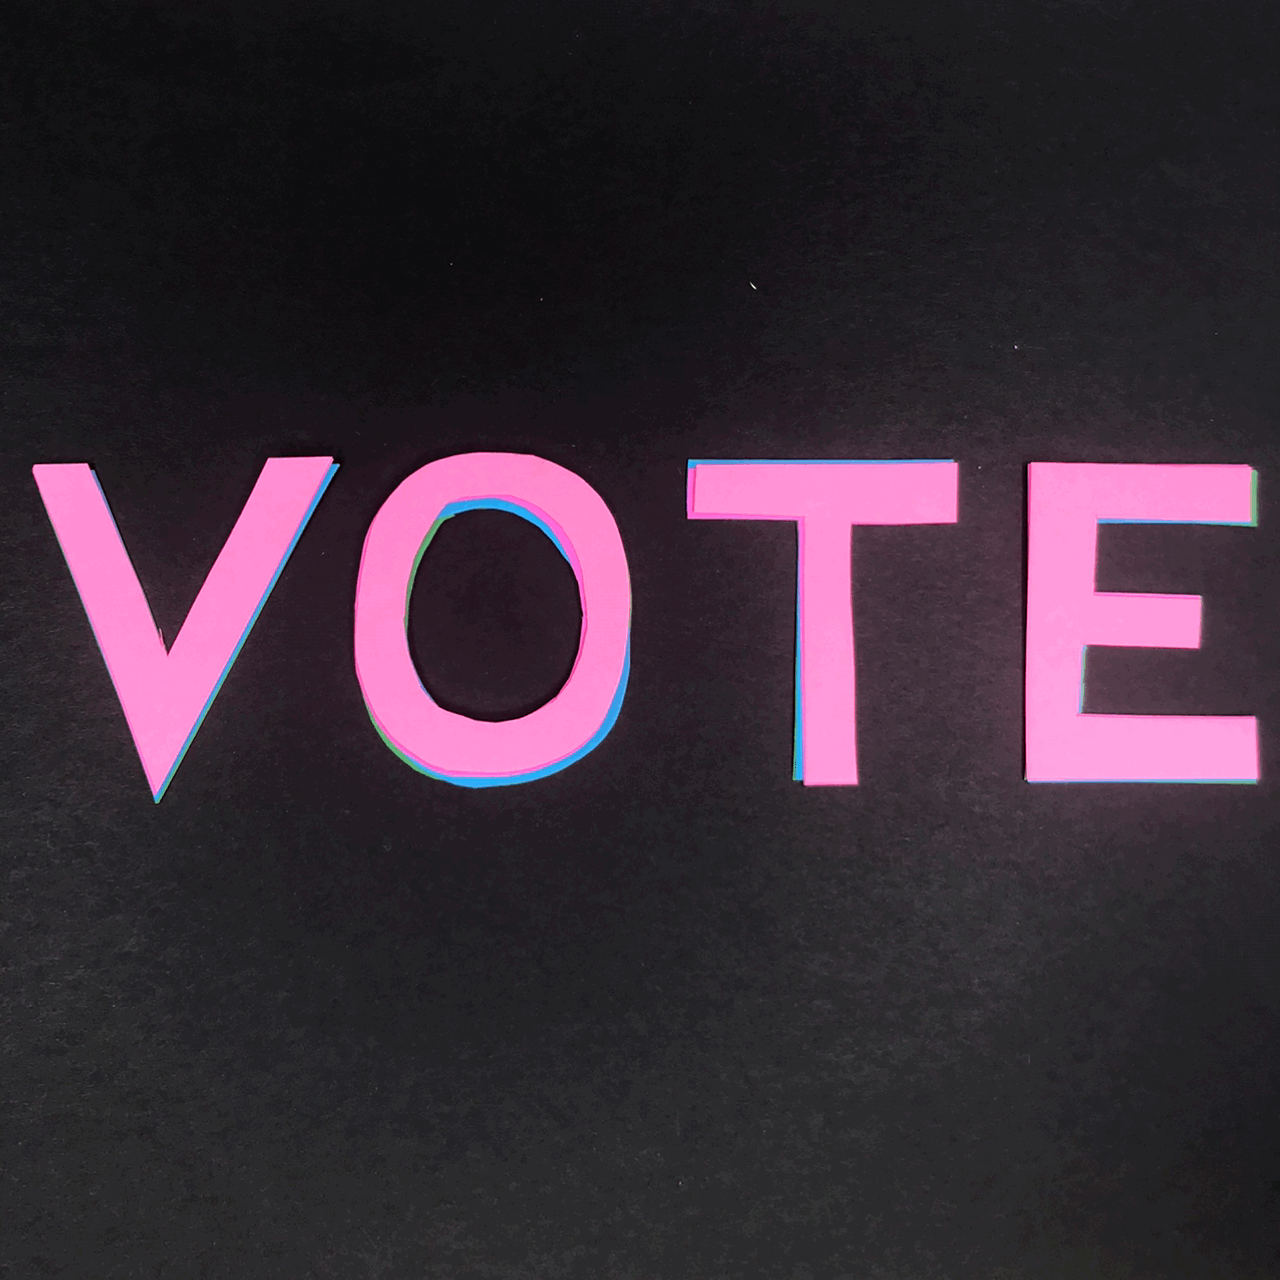 Pink letters spelling the word VOTE in all capital letters against a white background. The Word VOTE is wiggling in a GIF/graphic format.